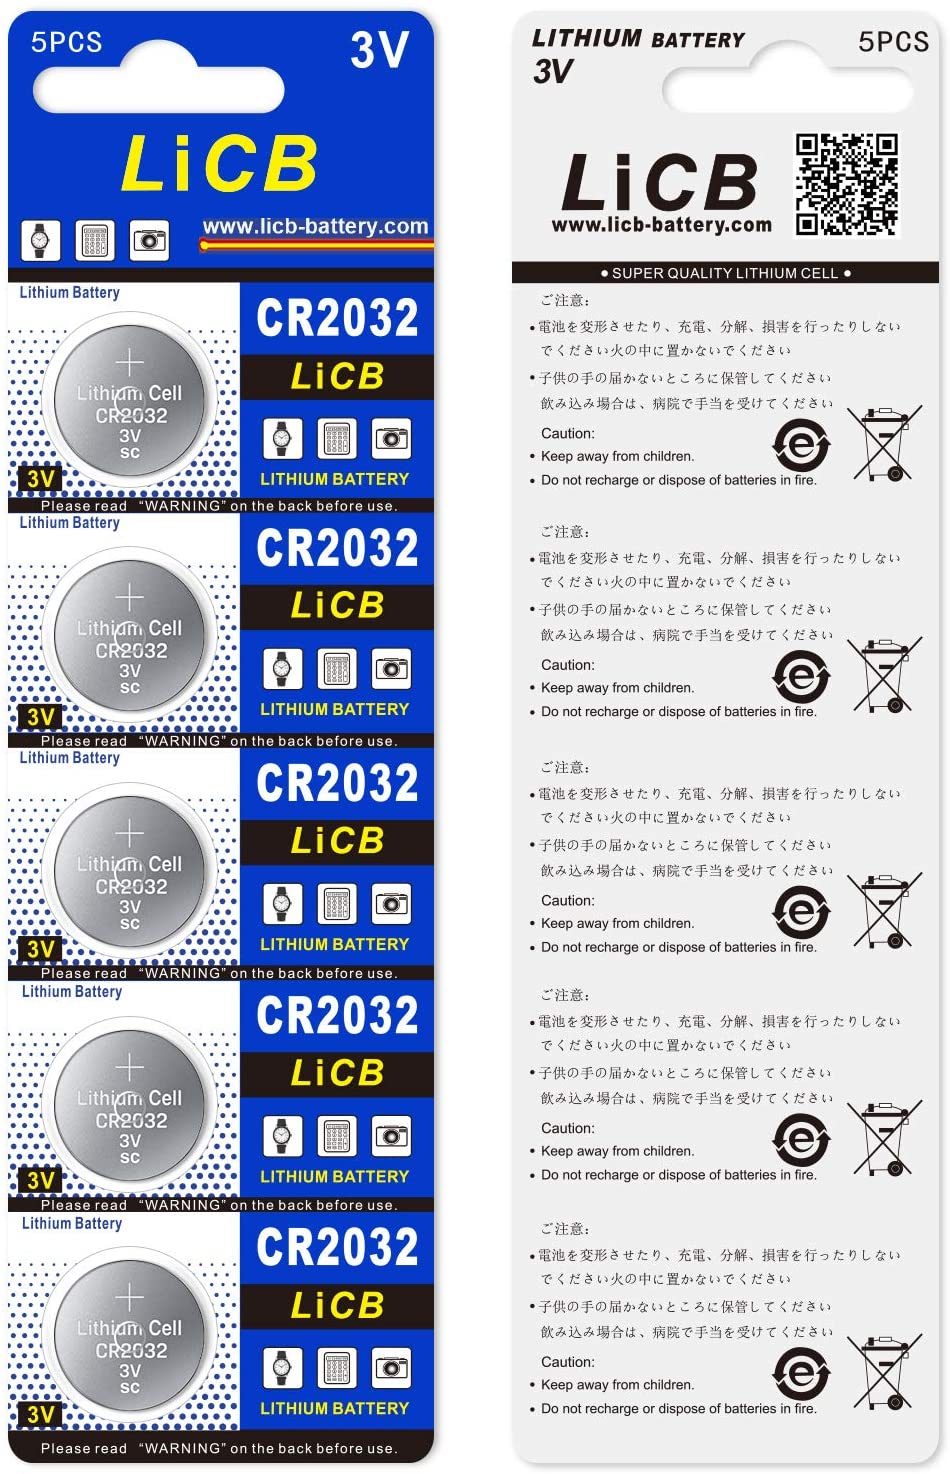 LiCB CR2032 Lithium 3V Battery Pack of 5 - e4cents